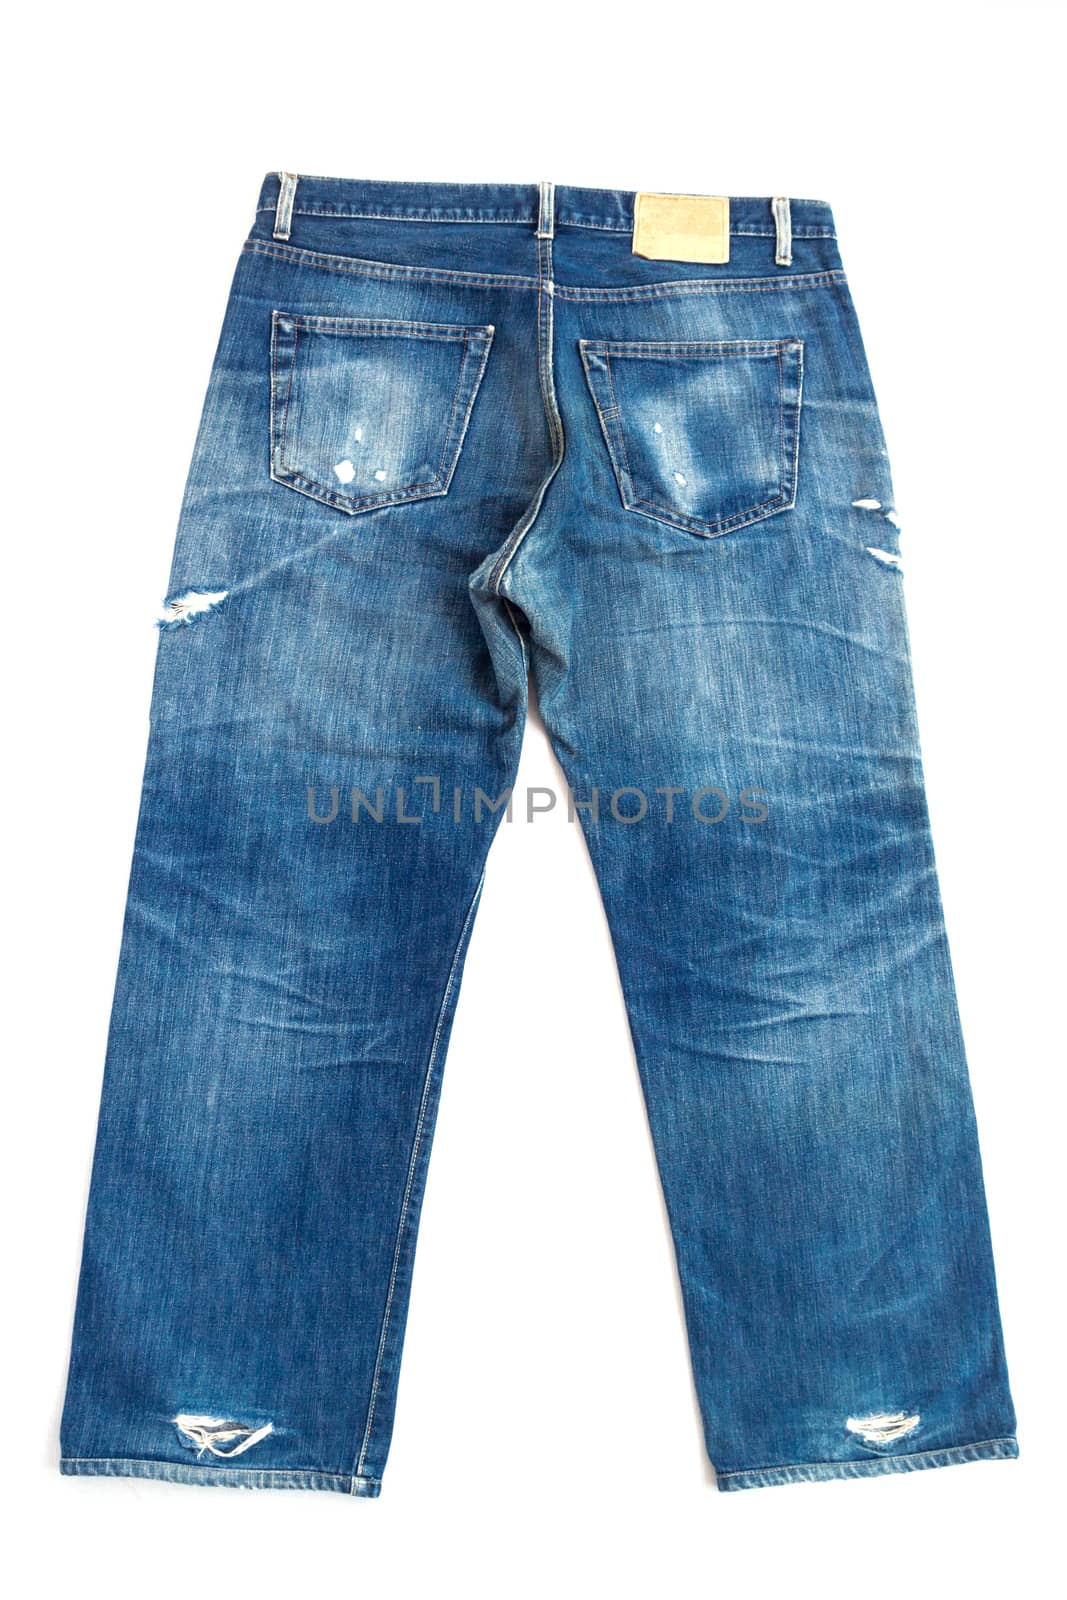 back blue jeans isolated on white background